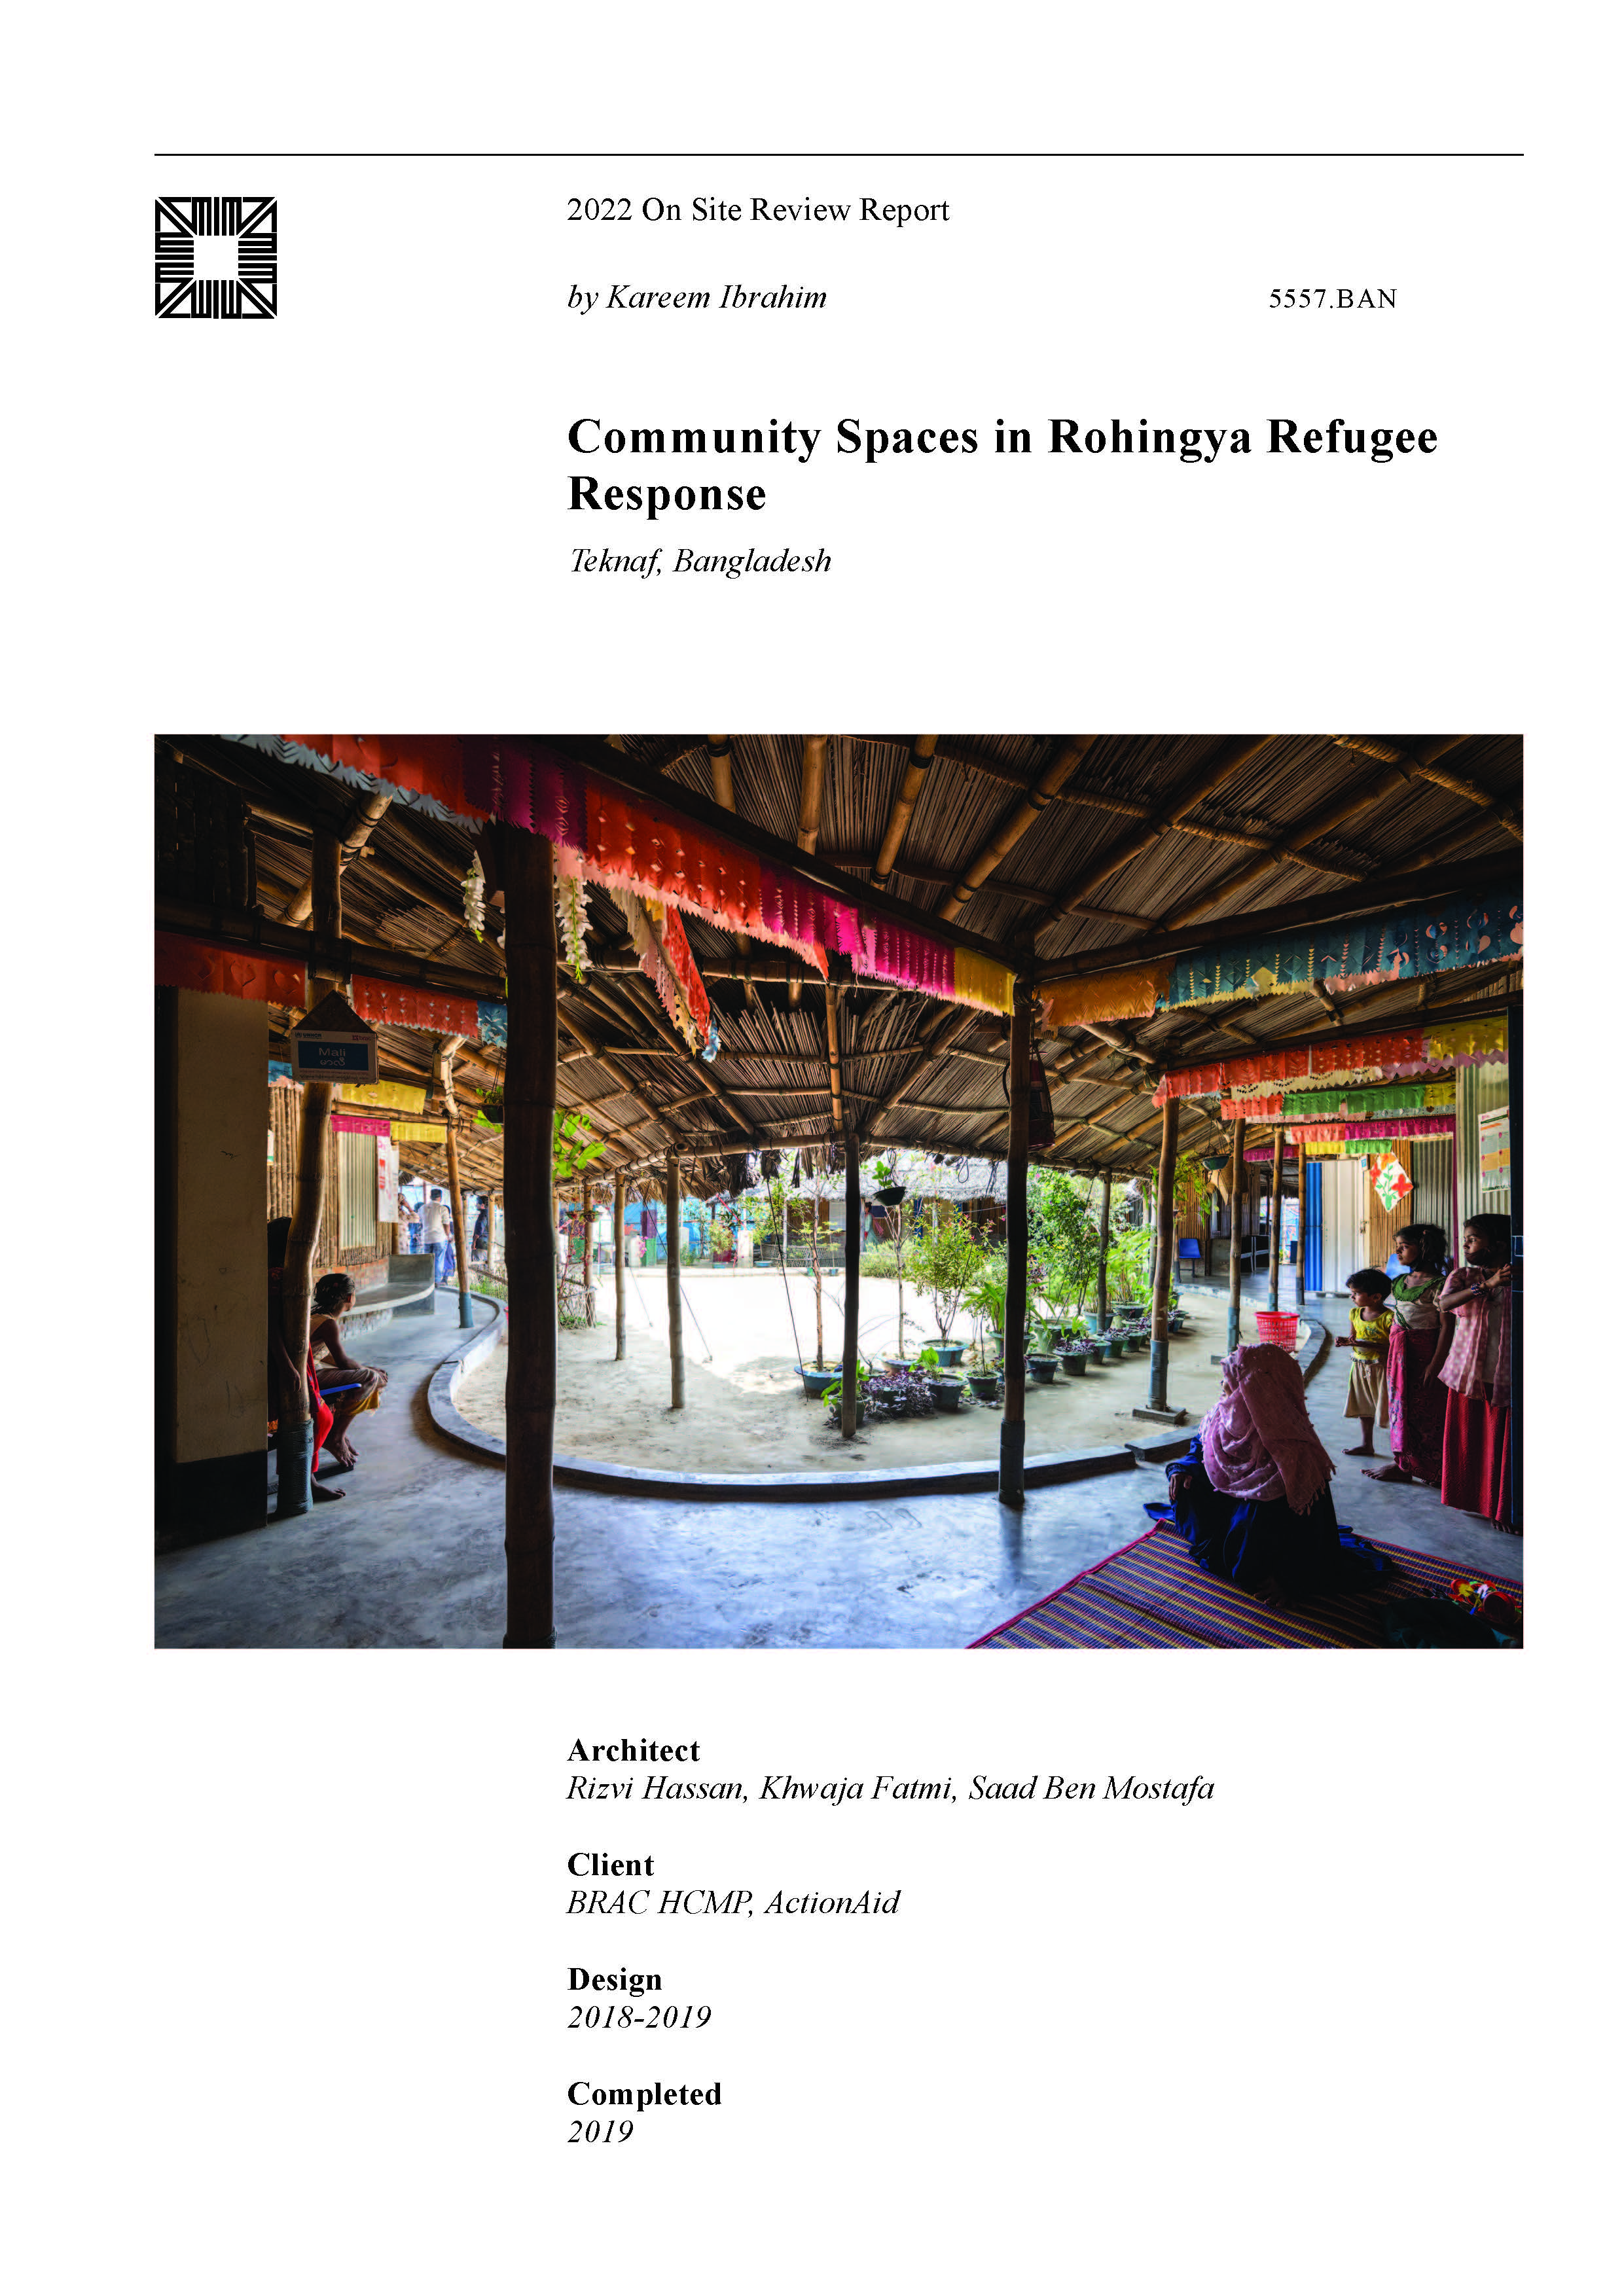 Community Spaces in Rohingya Refugee Response On-site Review Report